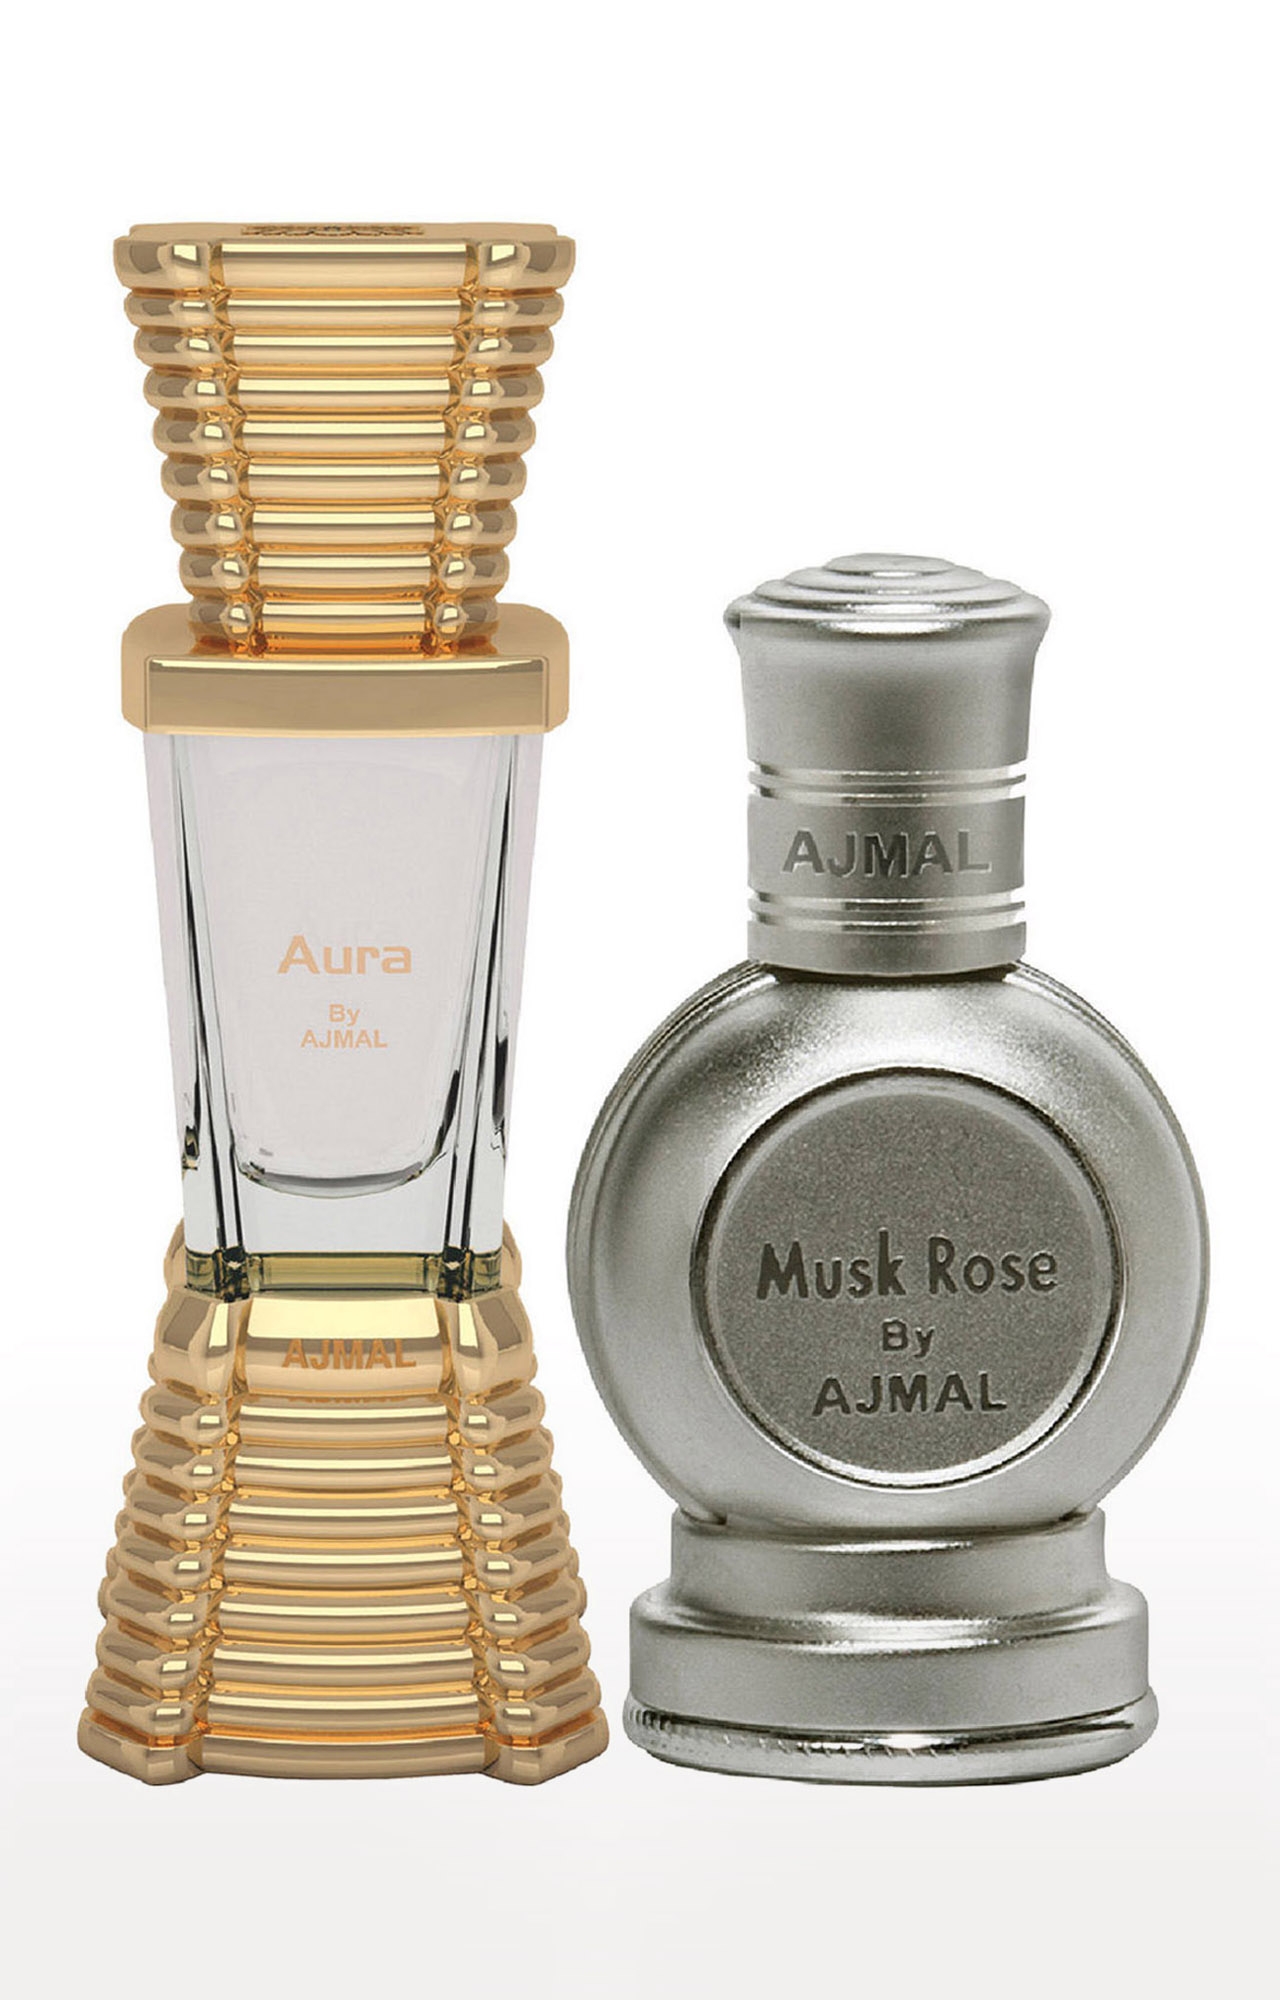 Ajmal | Ajmal Aura Concentrated Perfume Oil Alcohol-free Attar 10ml for Unisex and Musk Rose Concentrated Perfume Oil Musky Alcohol-free Attar 12ml for Unisex